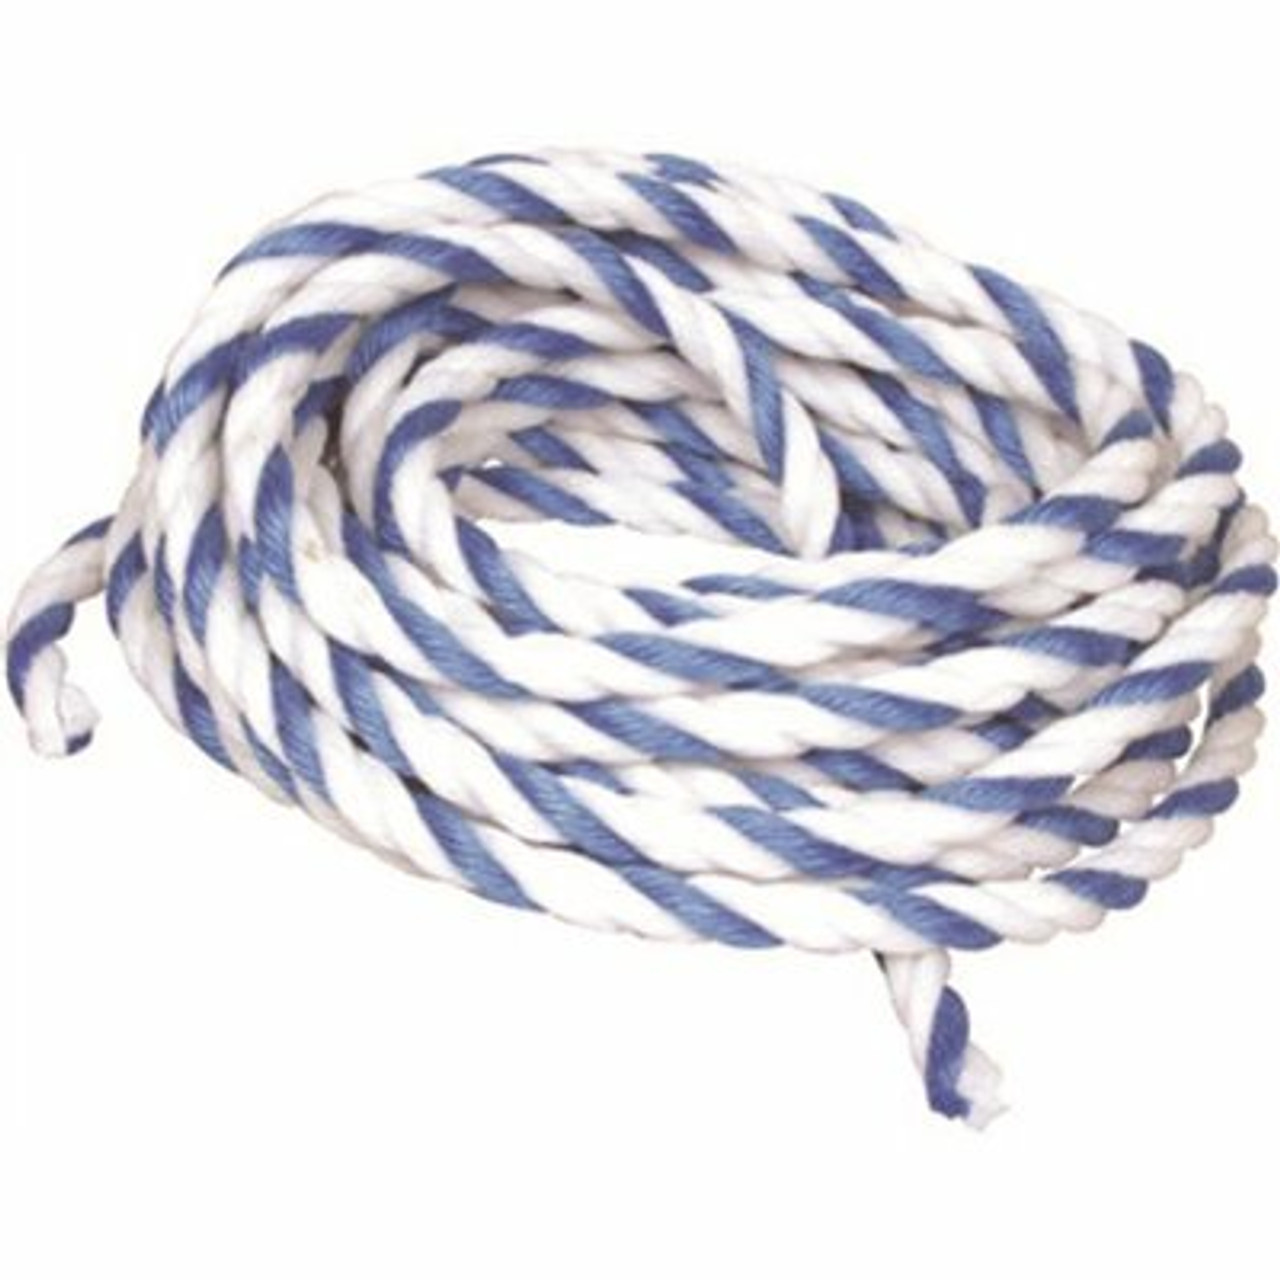 American Granby 3/8 In. X 50 Ft. Braided Blue And White Pool Rope